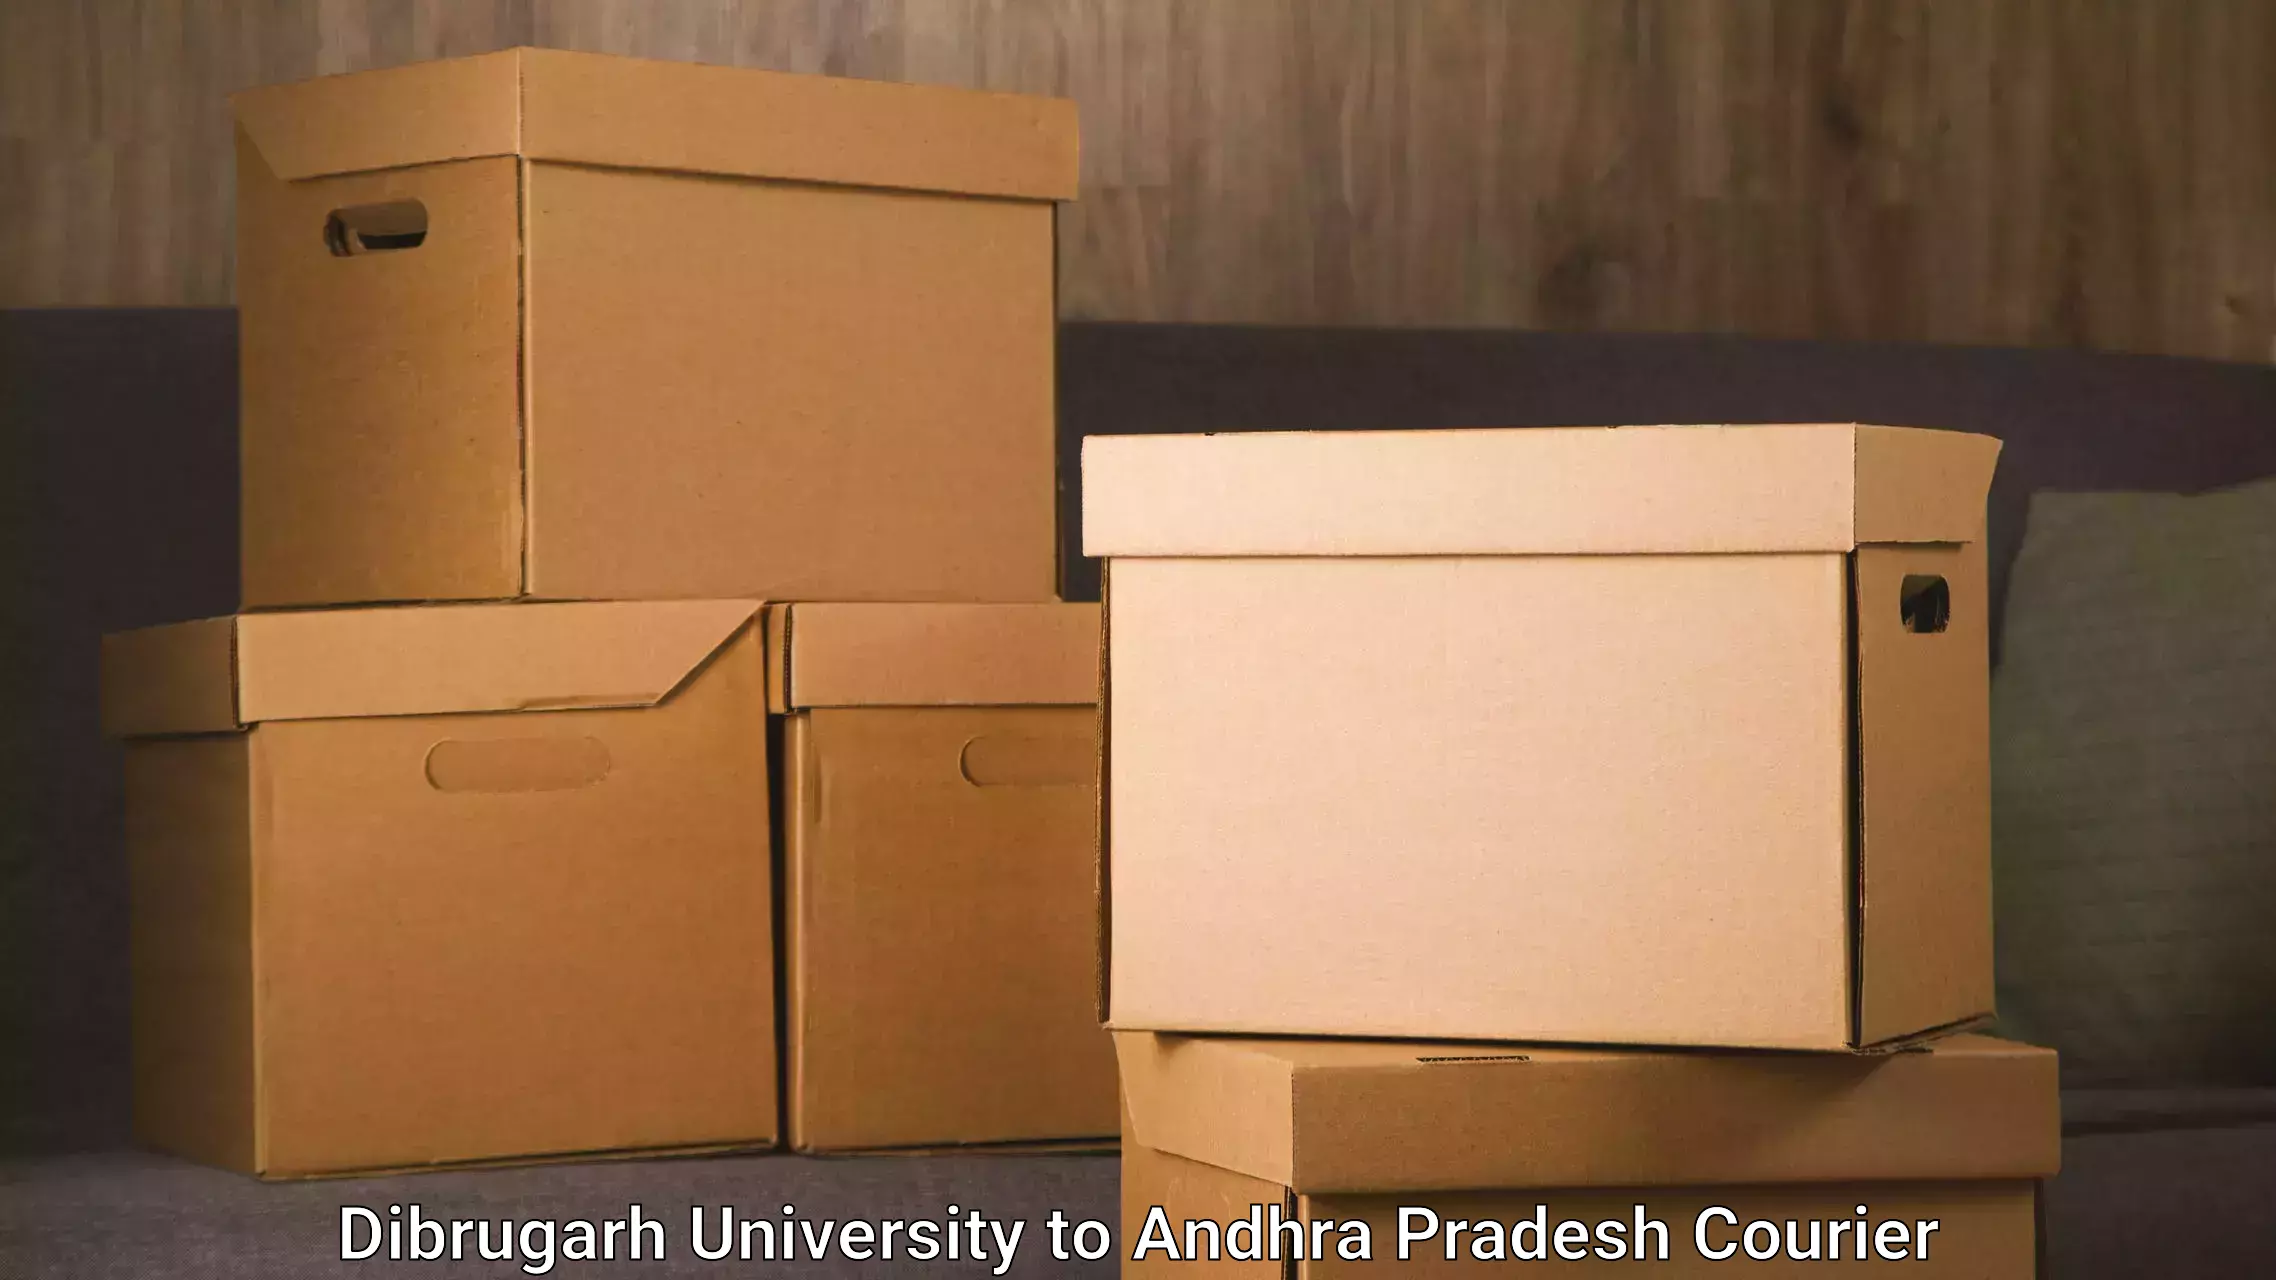 Personal courier services Dibrugarh University to Dachepalle